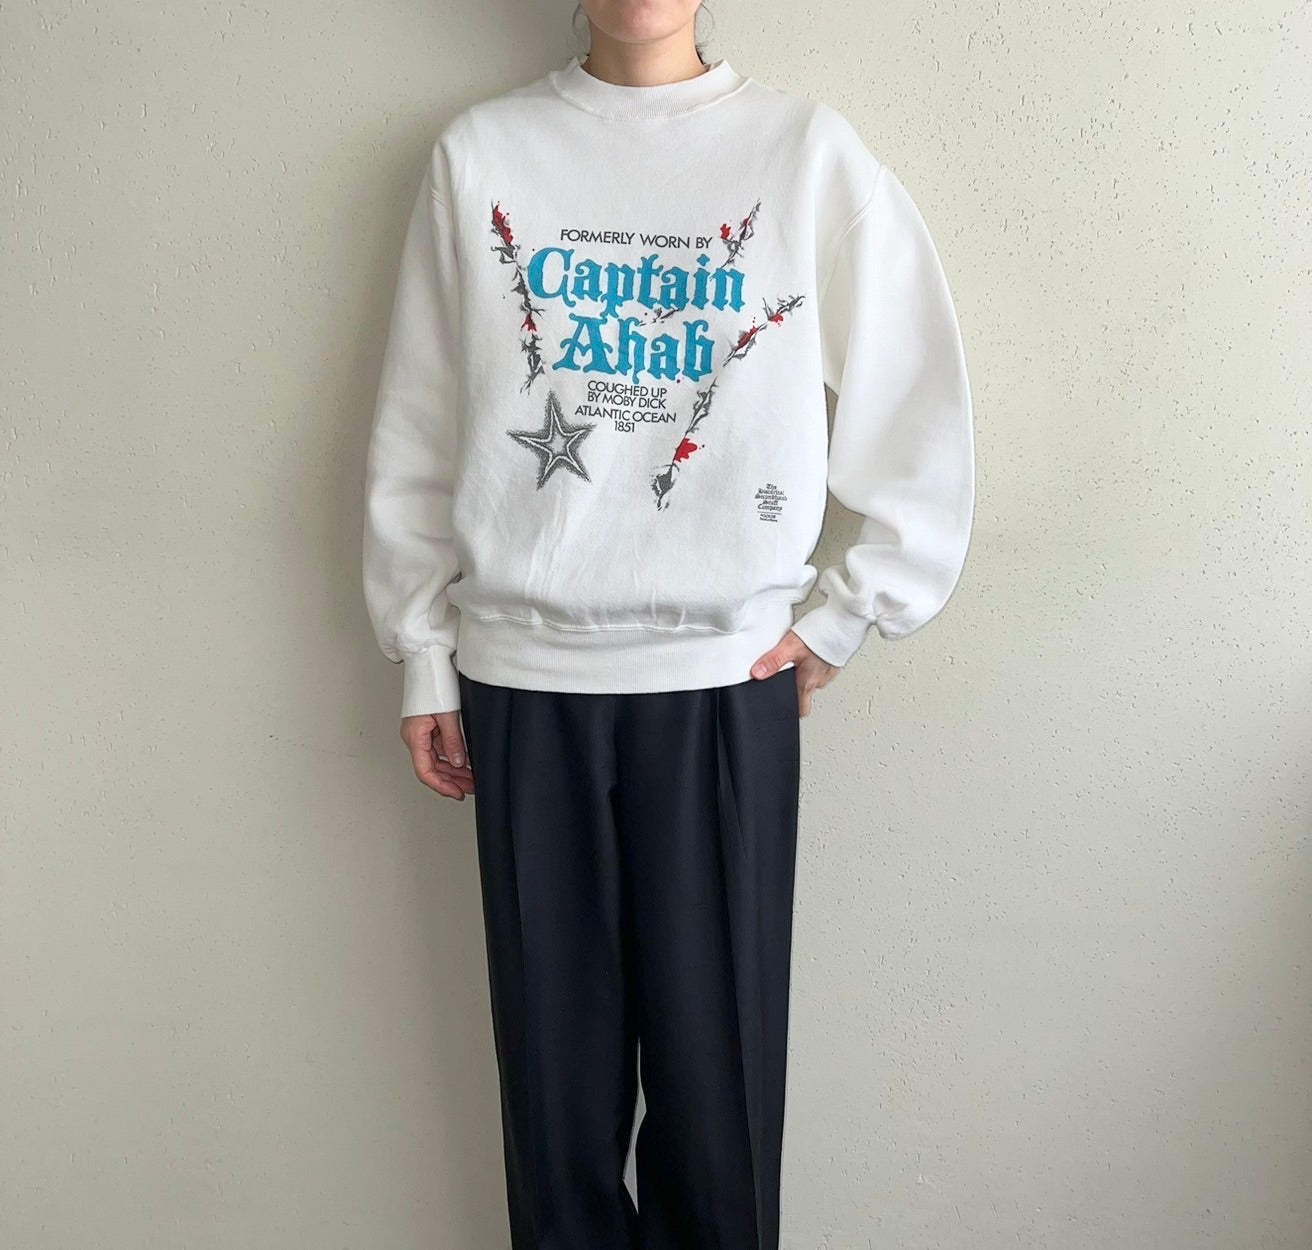 90s "Captain Ahab | Moby-Dick" Sweater Made in USA